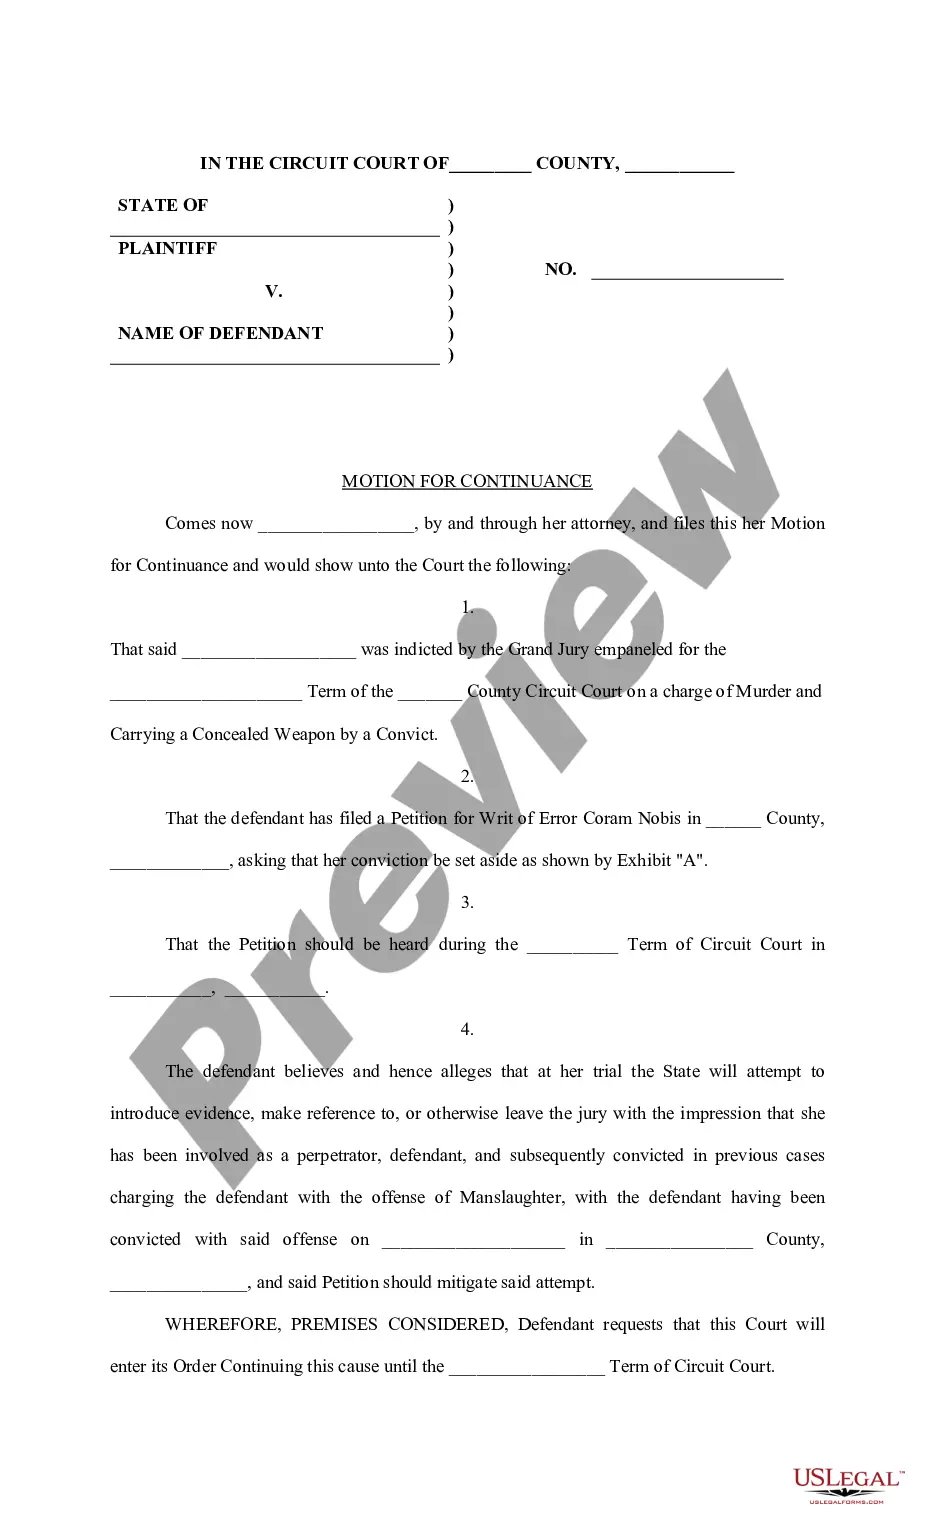 Delaware Motion for Continuance Continuance US Legal Forms